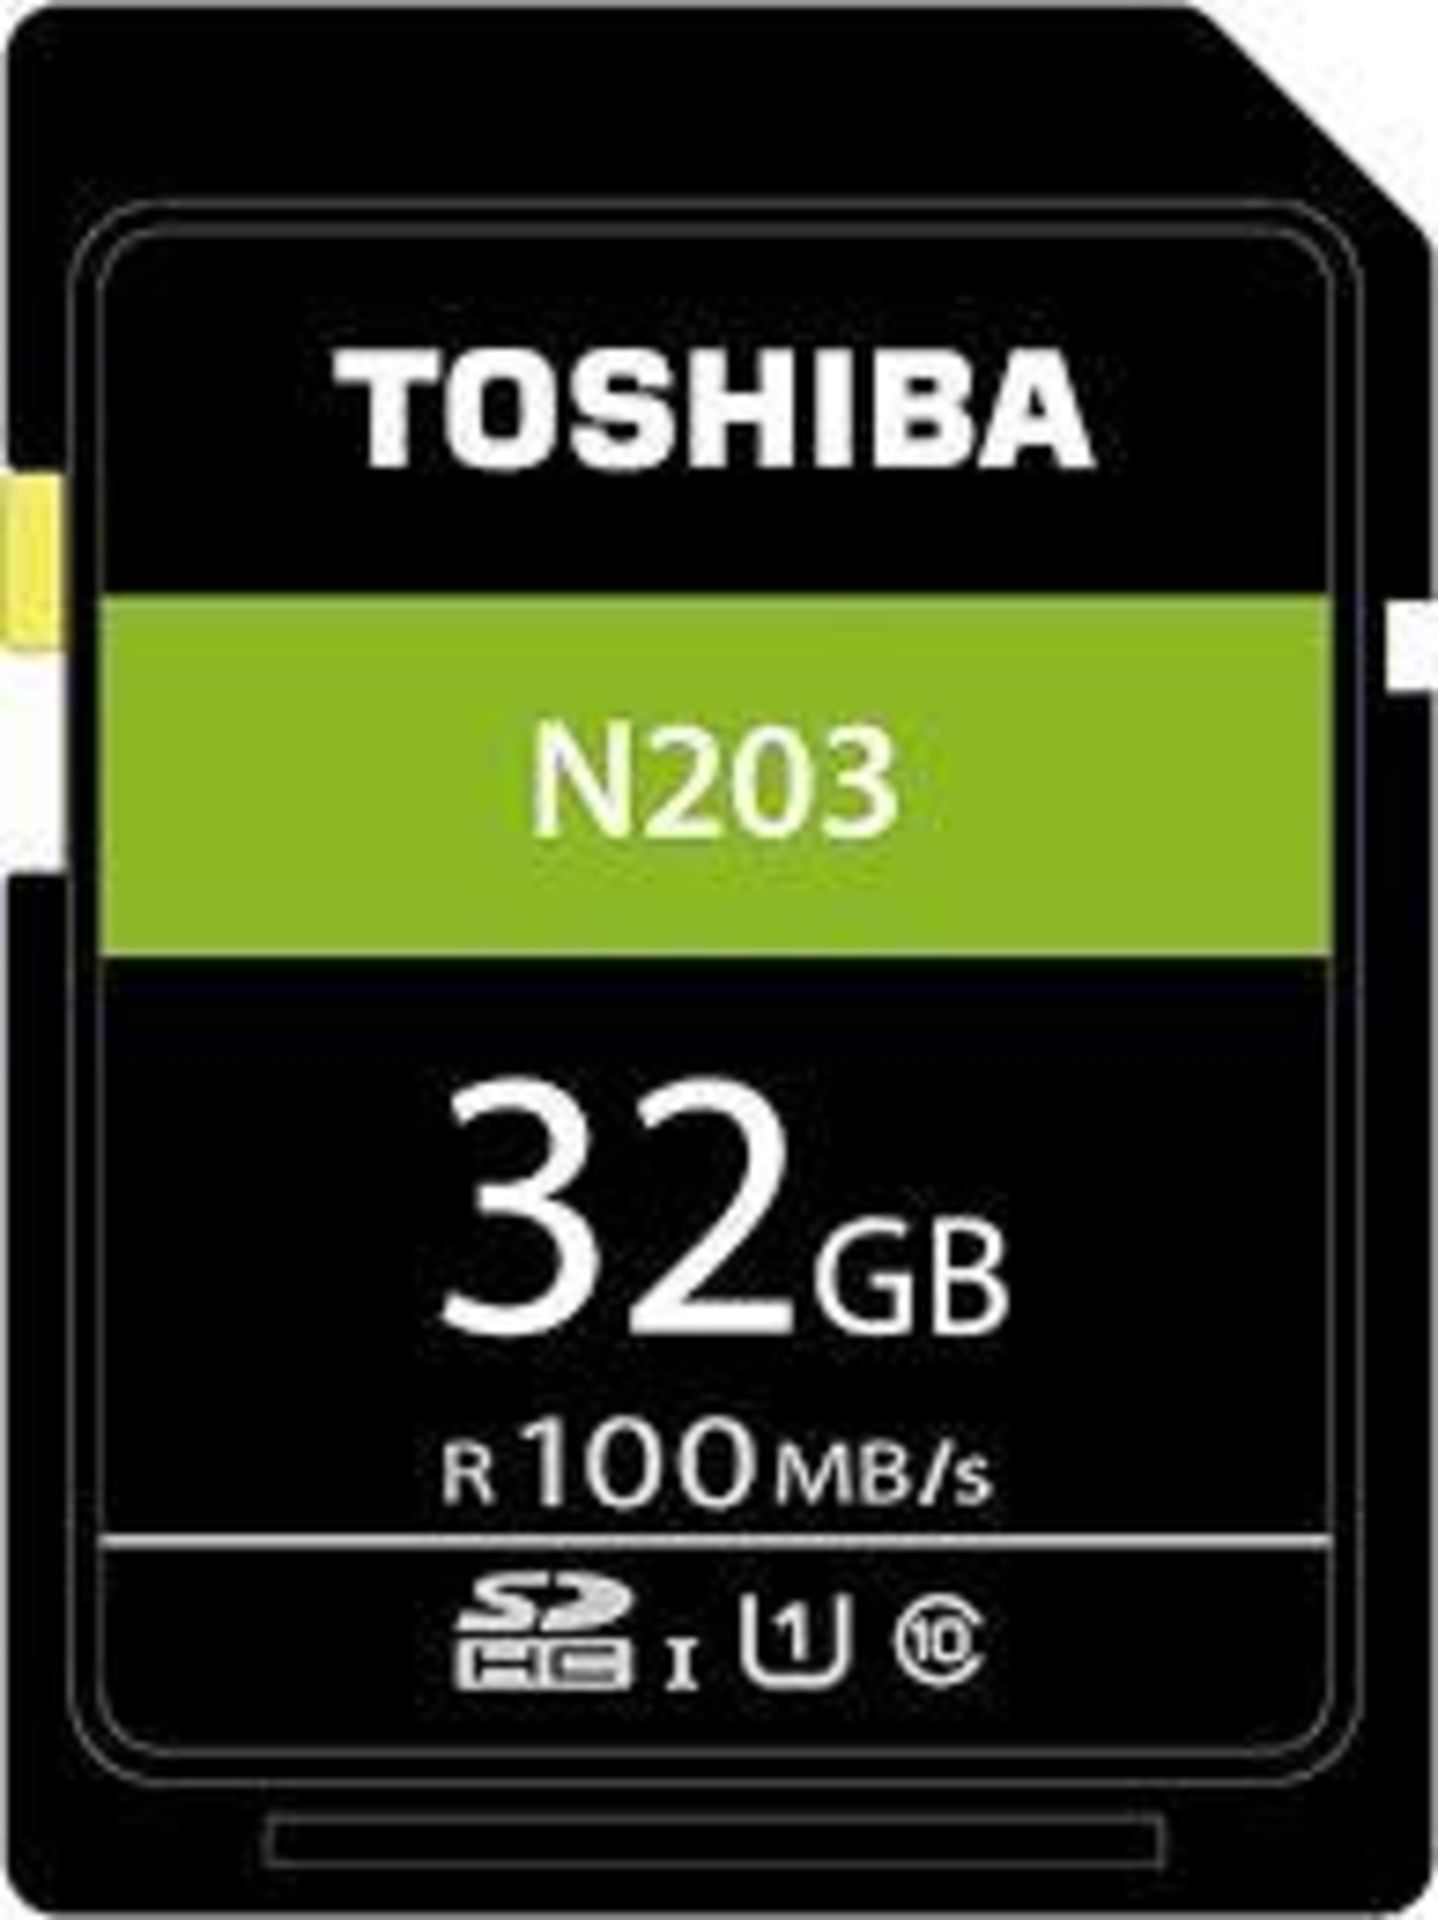 Combined RRP £100. Lot To Contain 10 Brand New Packaged Toshiba 32Gb Class 10 Uhs-1 Sdhc Cards For C